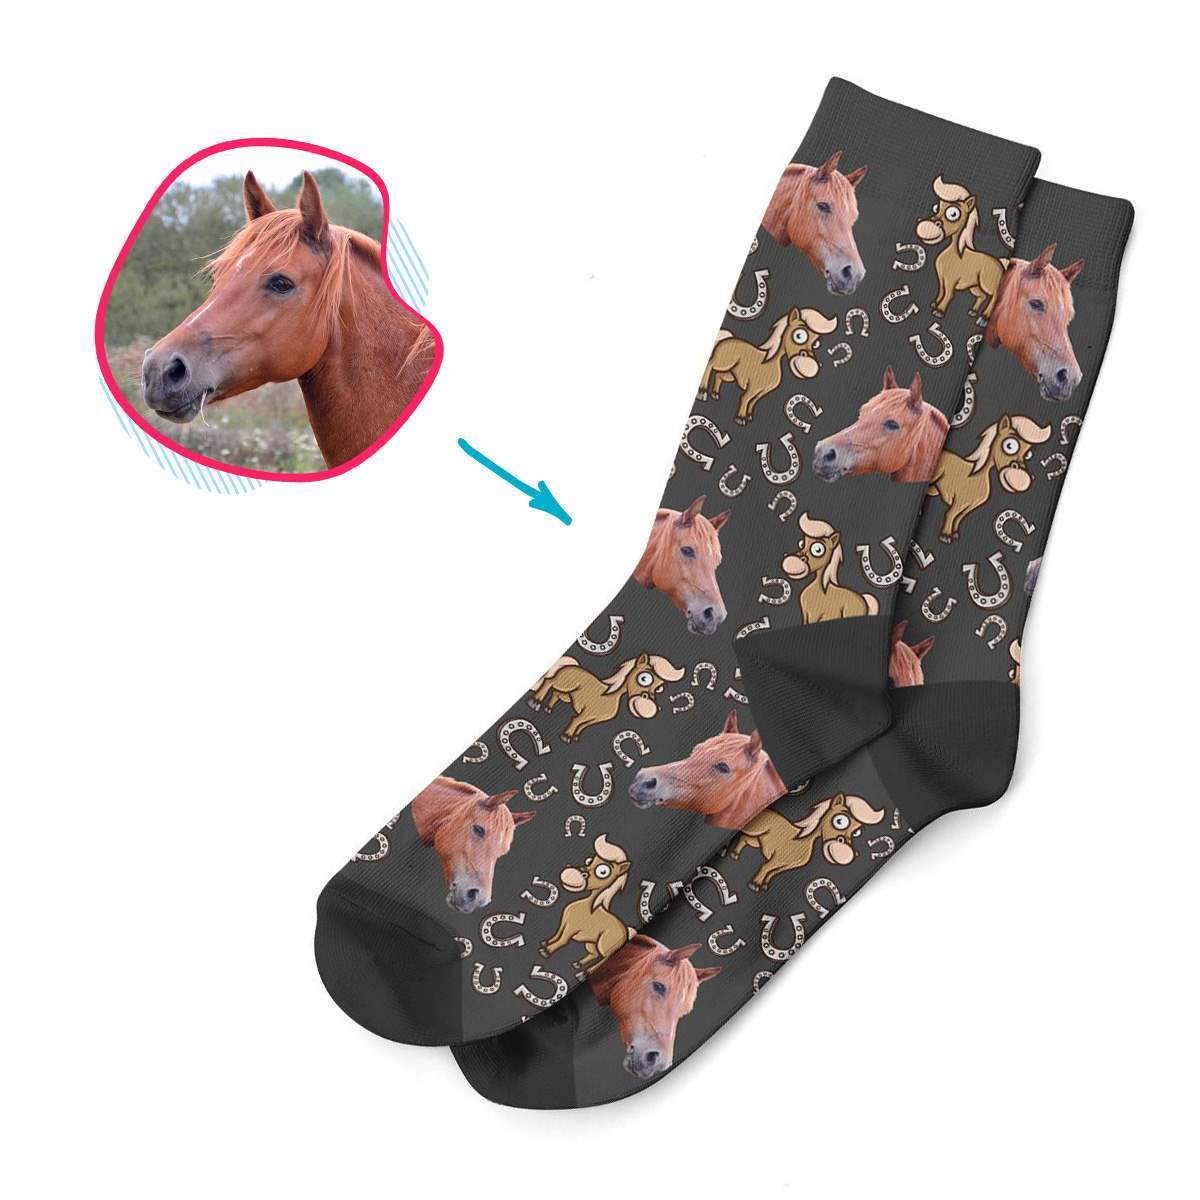 dark Horse socks personalized with photo of face printed on them